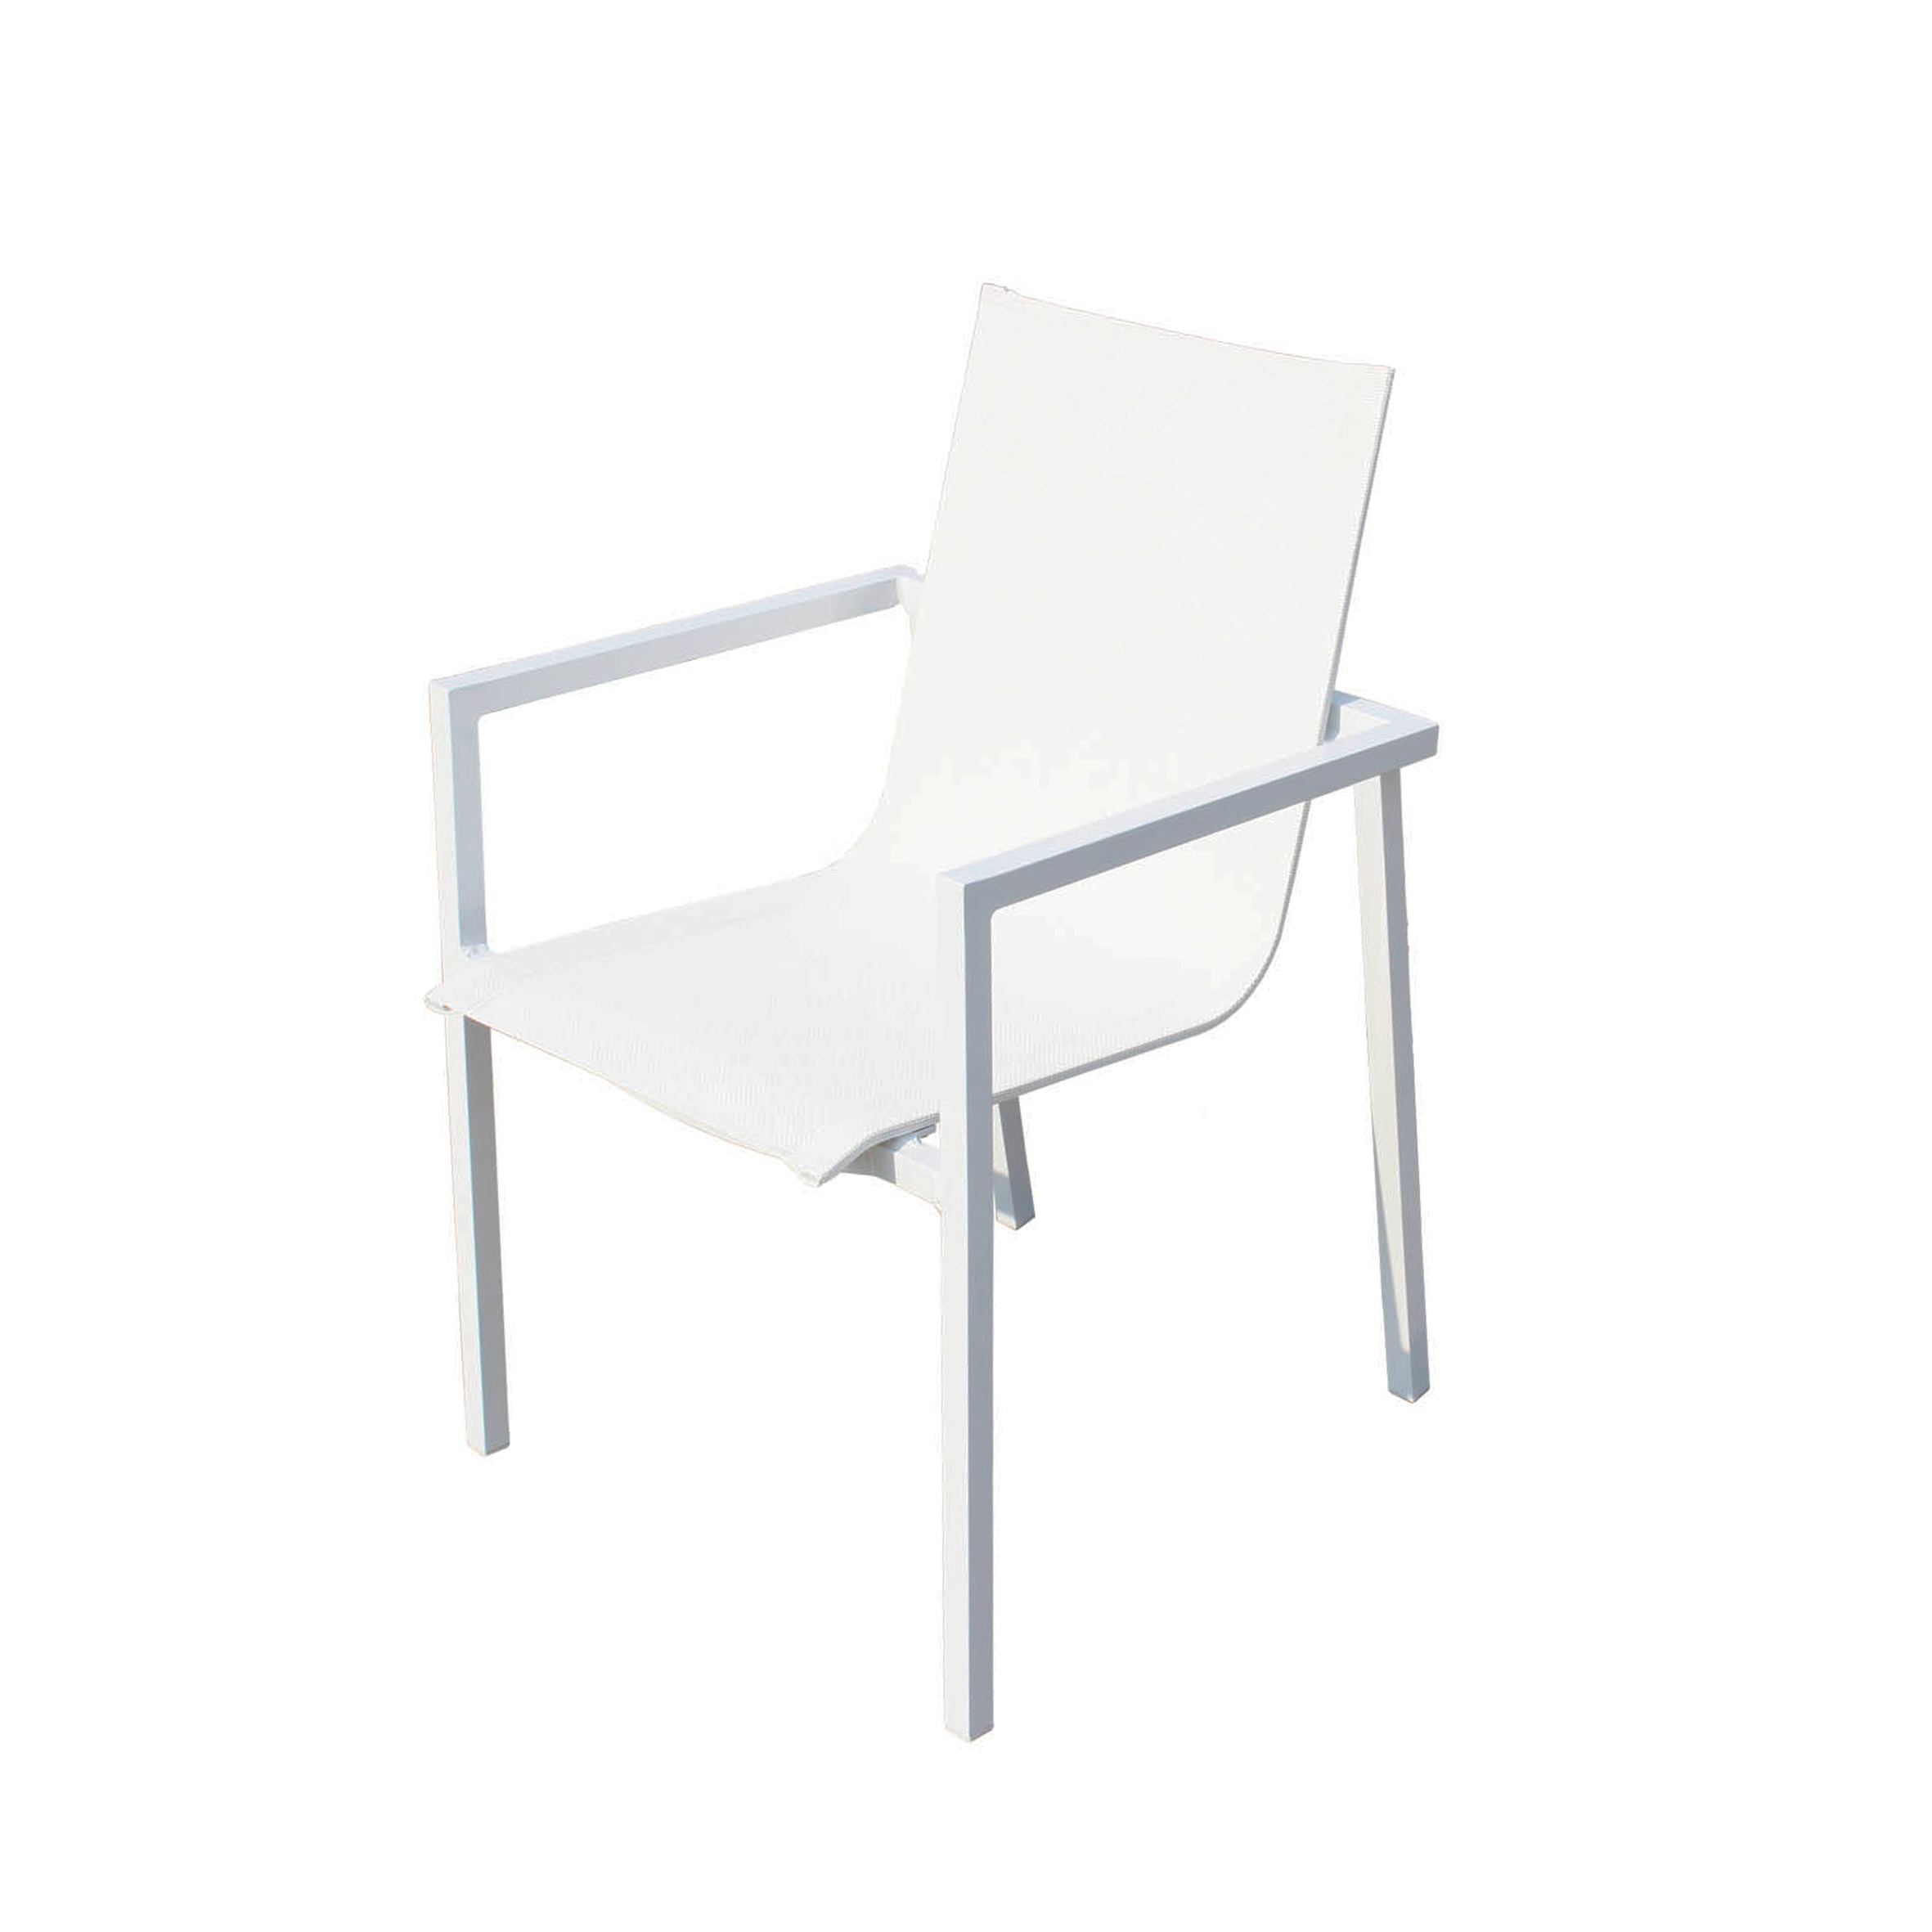 Valencia textile dining chair S1